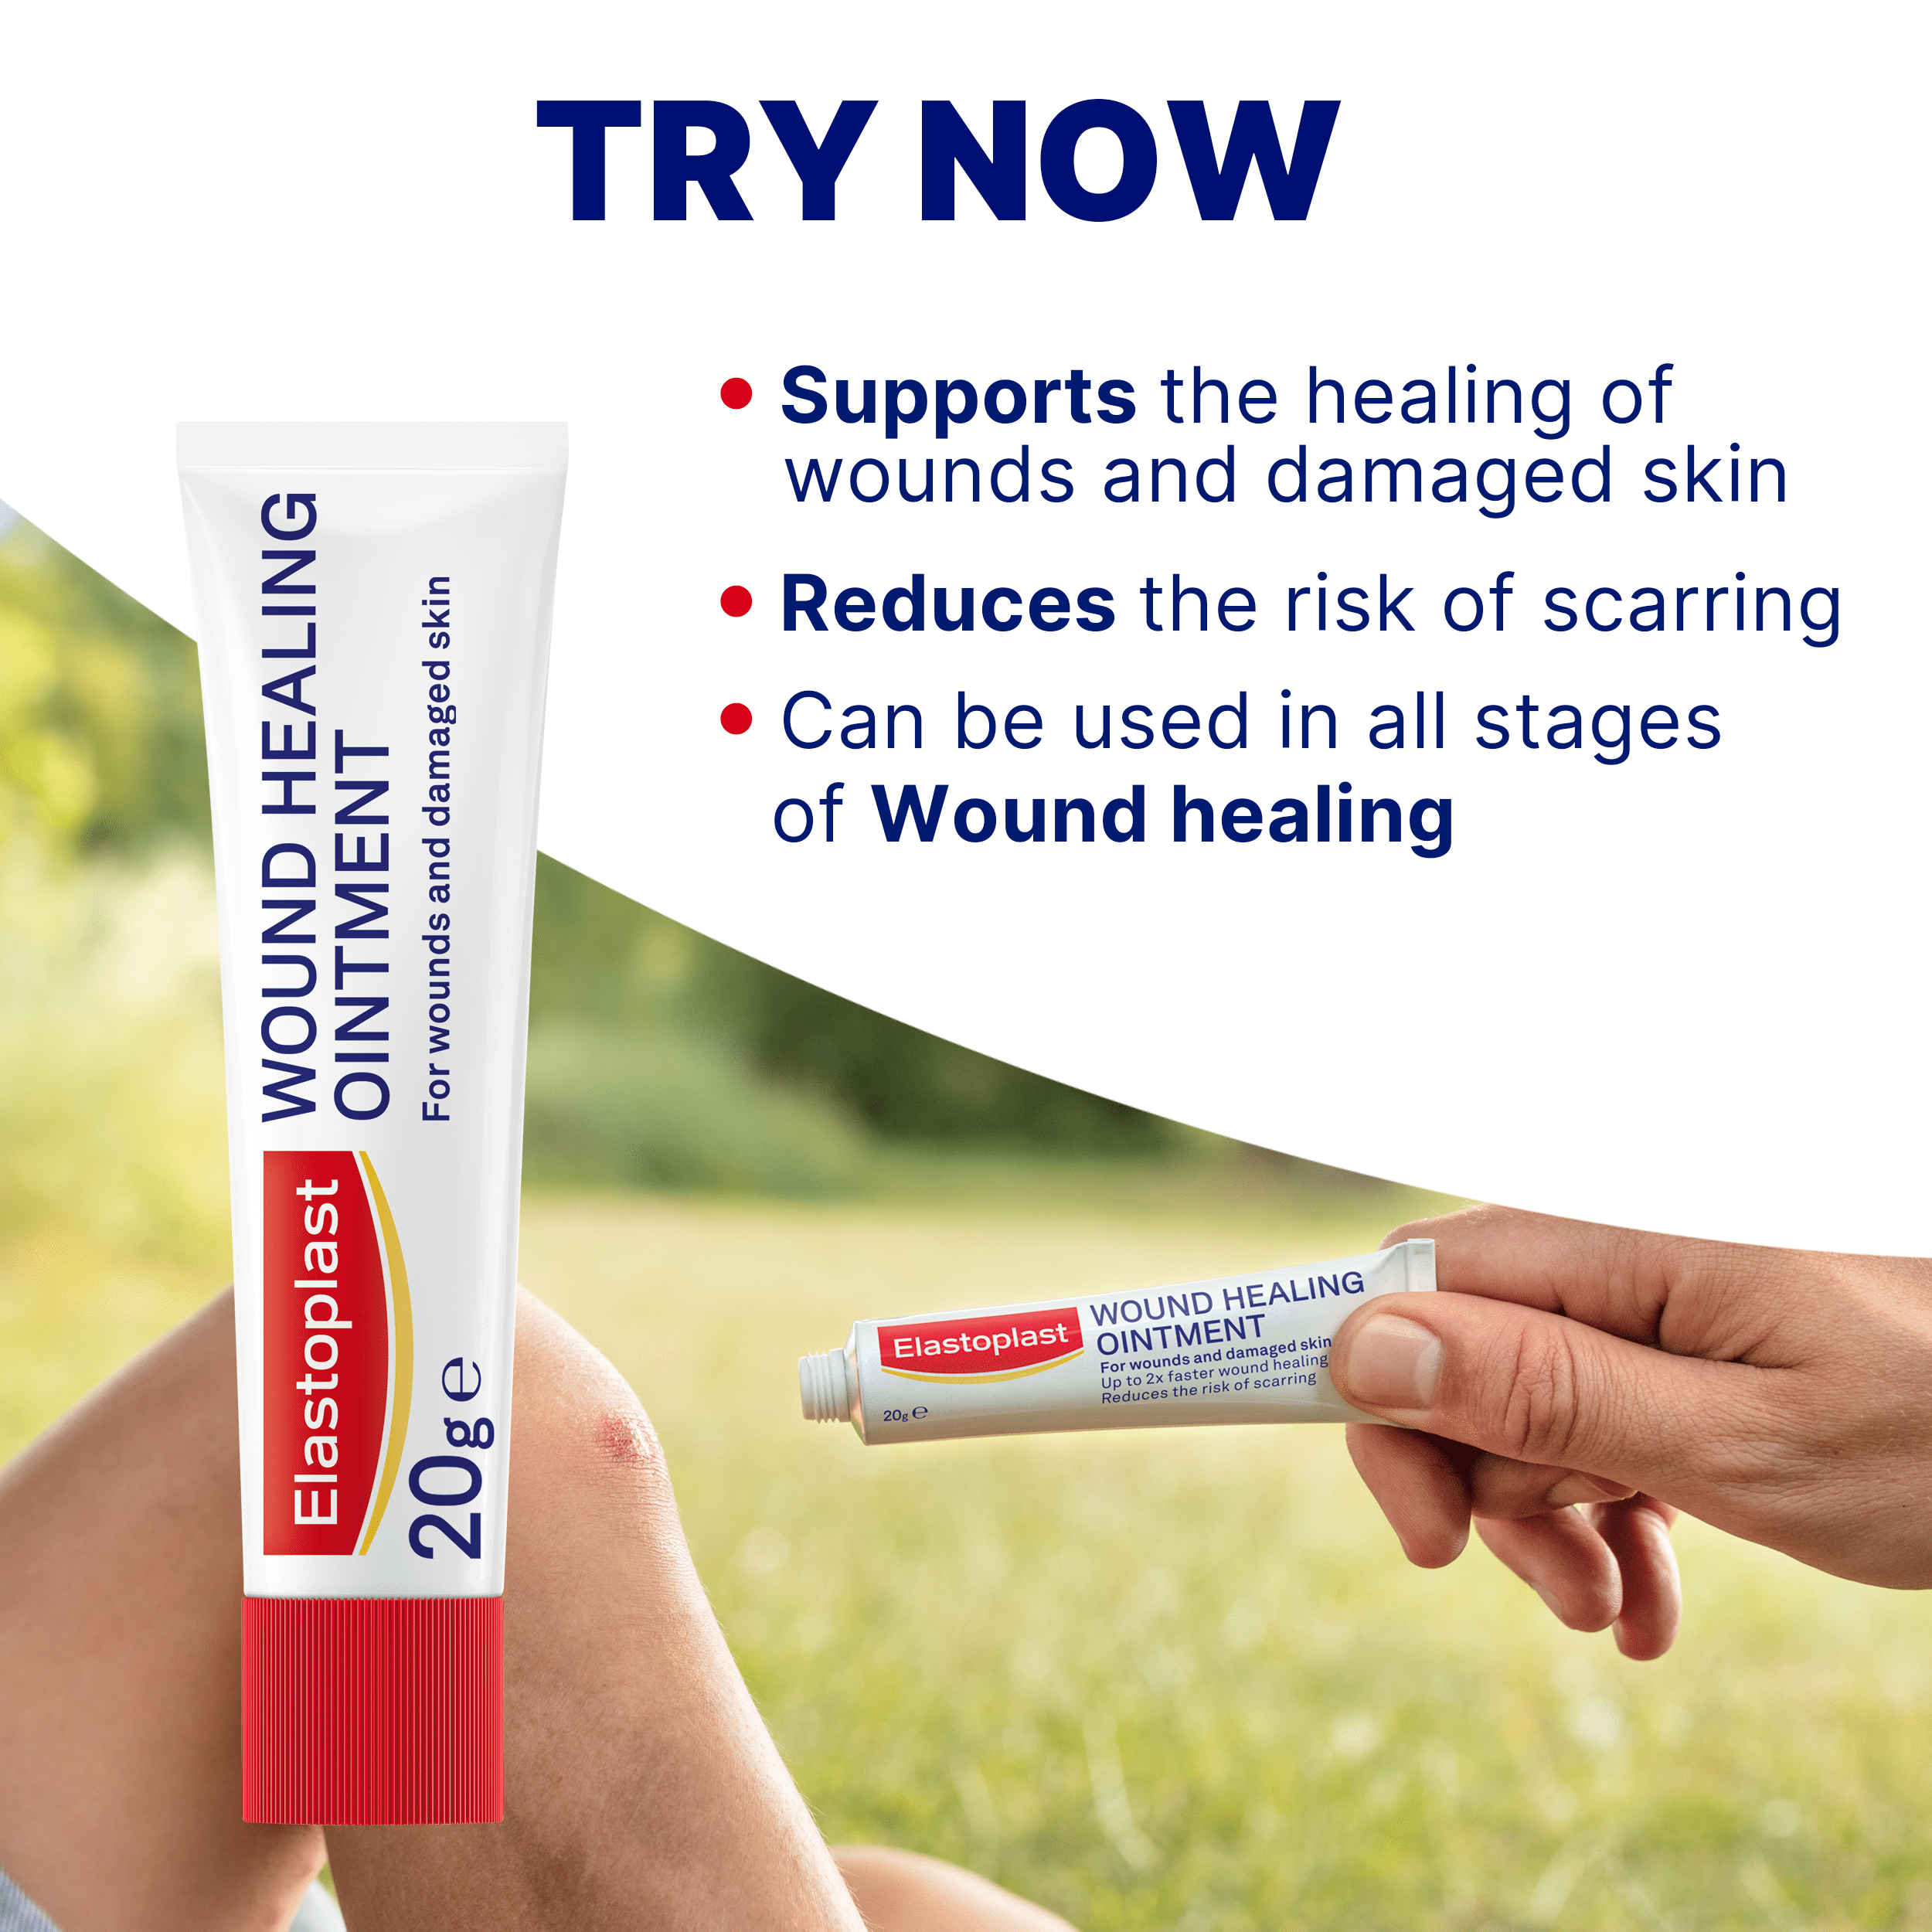 Regular Wound Plaster for minor cuts & wounds